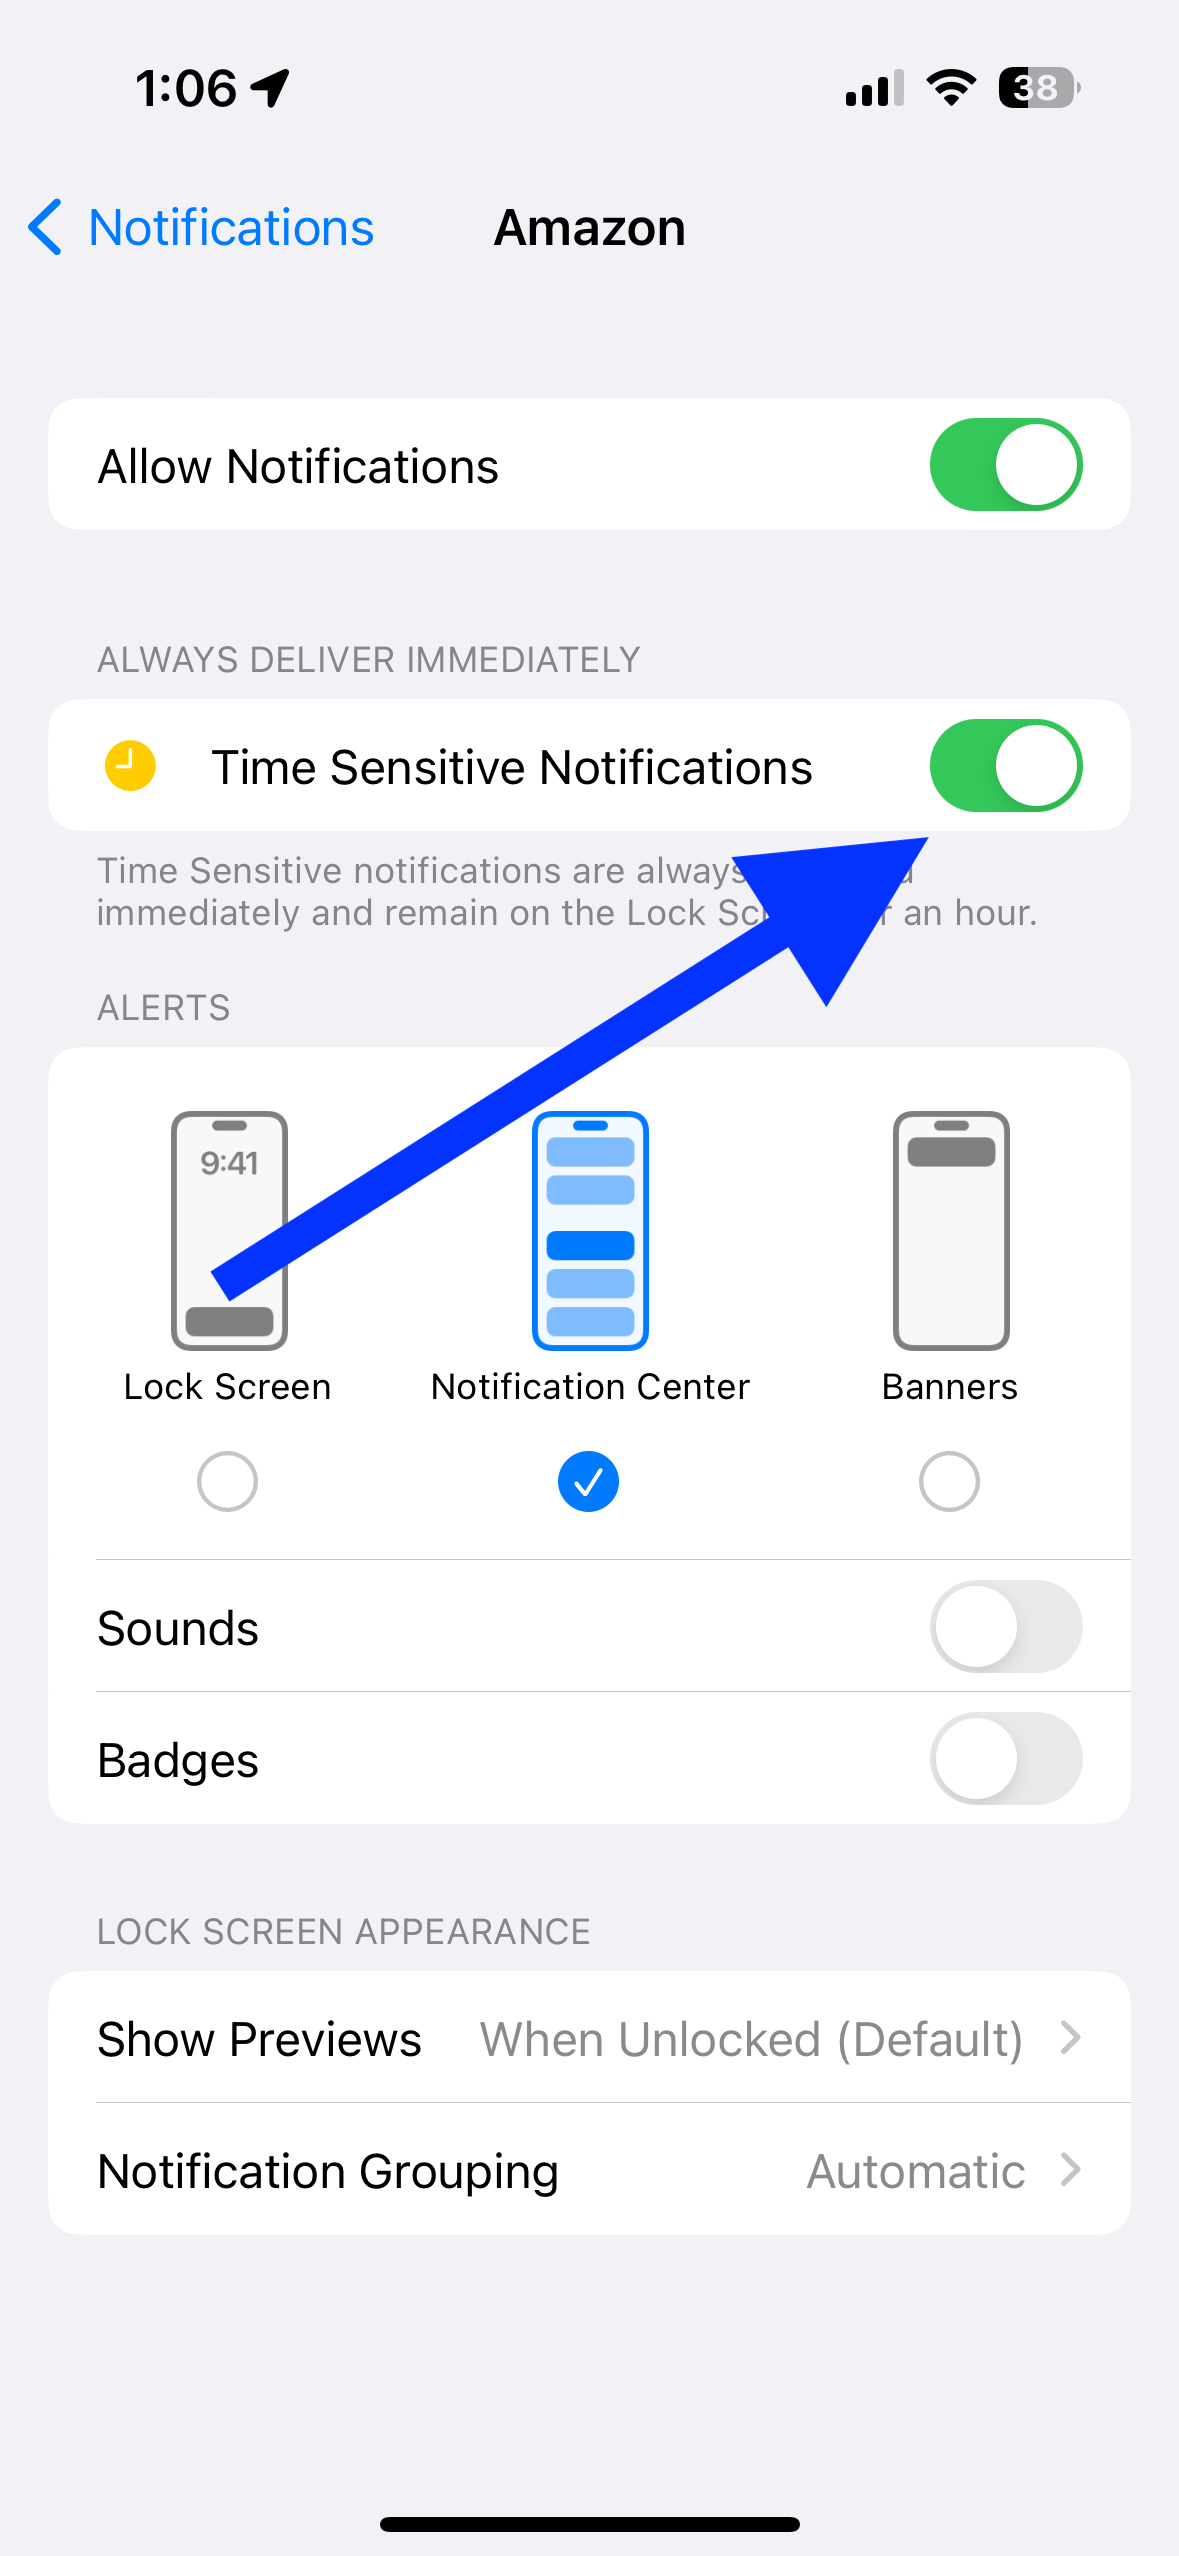 Time Sensitive Notifications switch